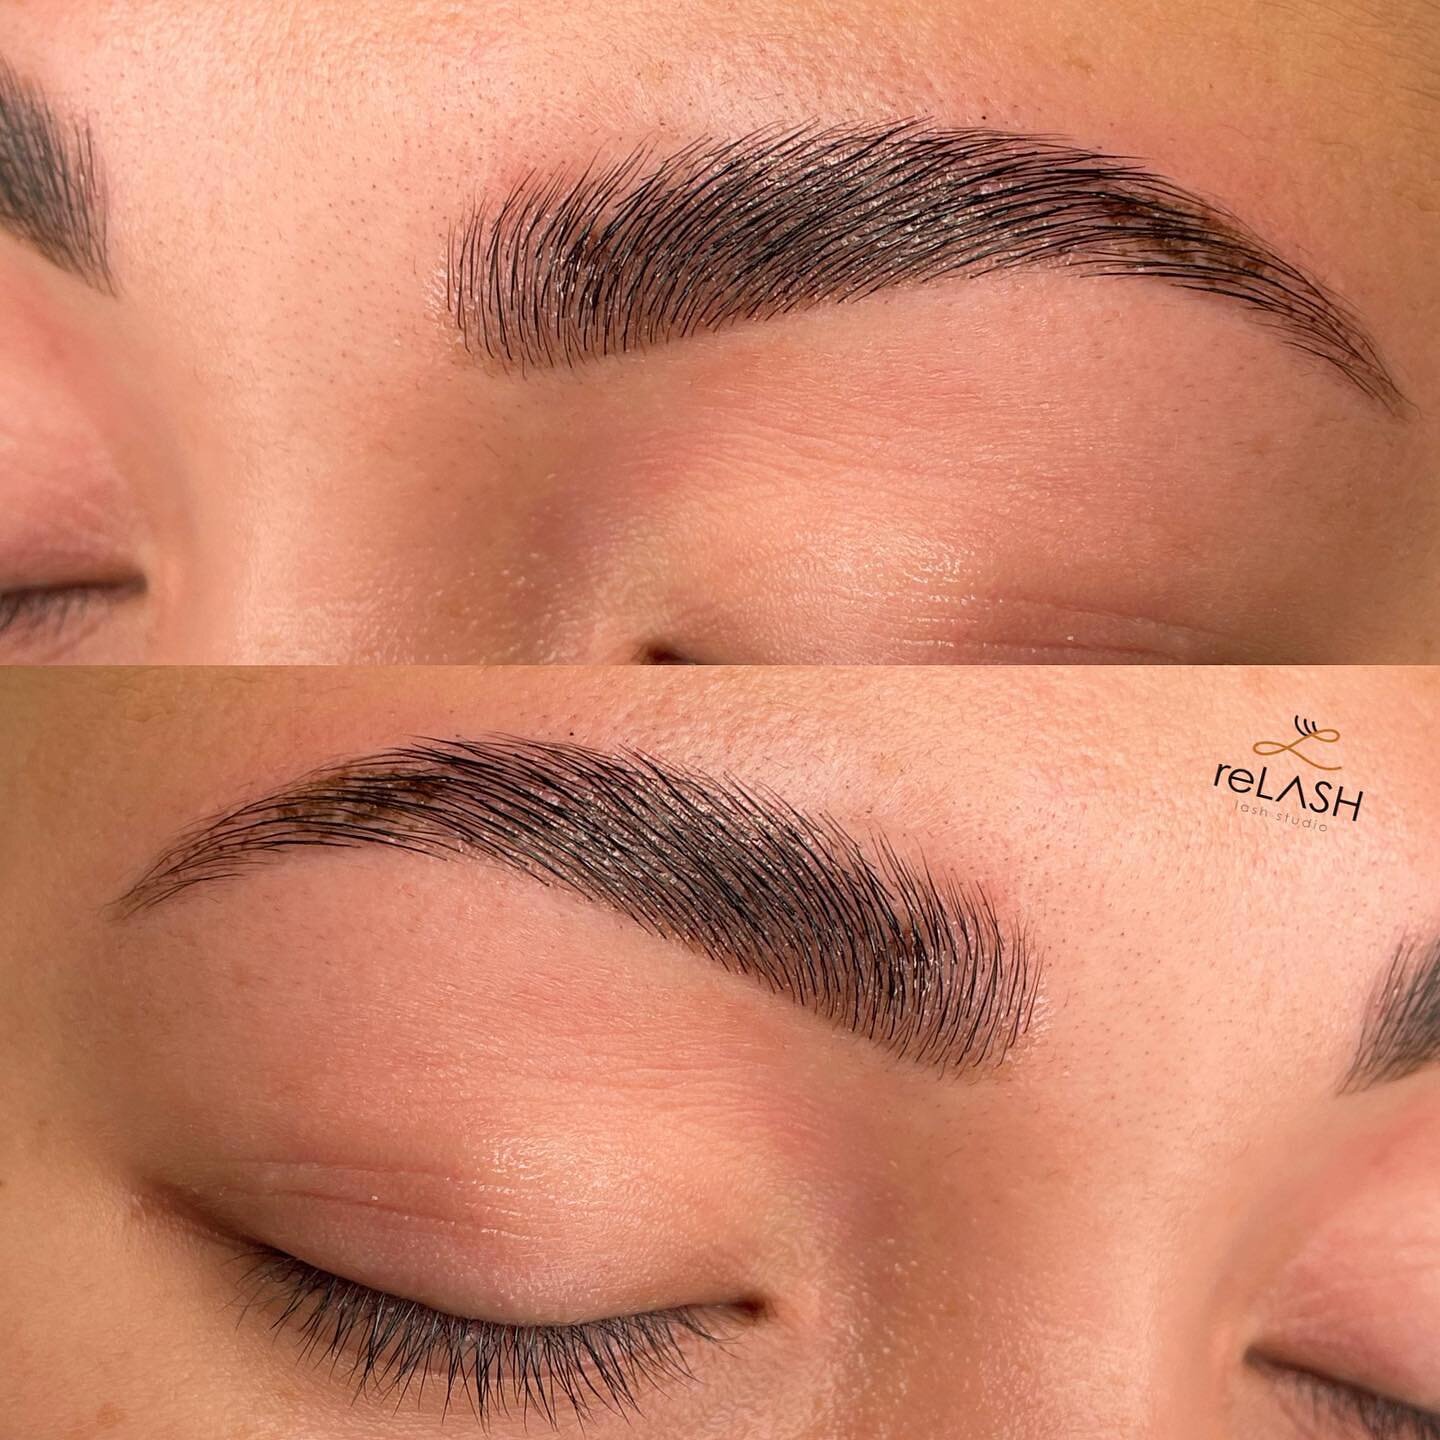 Brow Lamination, Shape and Tint combo ✨

For this client I used @thuya_nyc Brow Lamination, Bronson Hybrid Tint and @gigispa wax 

Have you been wanting to try this service and have questions? Feel free to ask in the comments 😁

Are you a lash or br